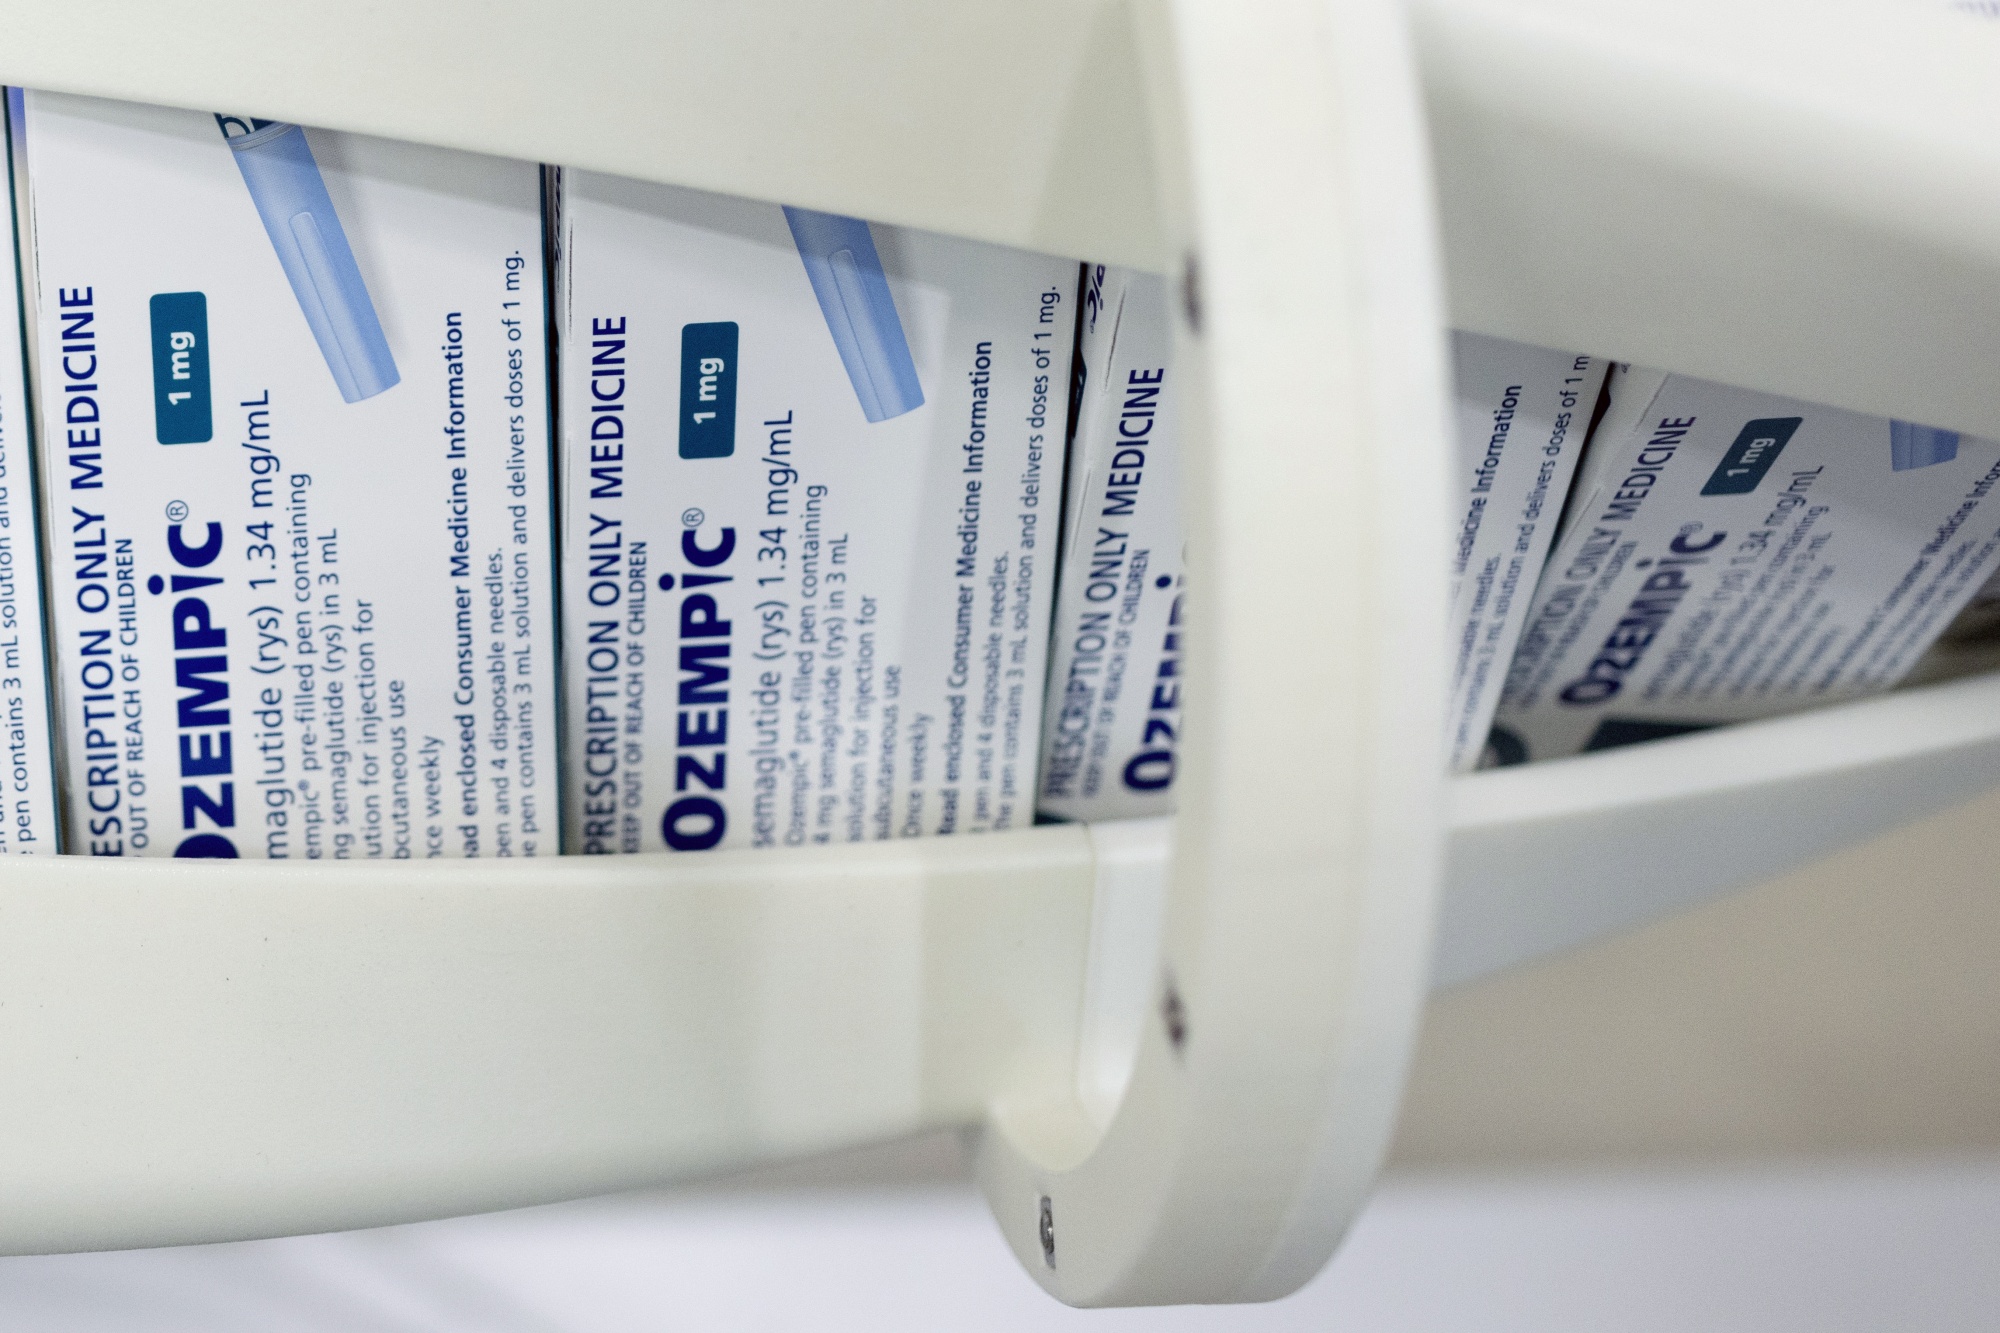 Novo Nordisk, the maker of Wegovy and Ozempic is now Europe's most